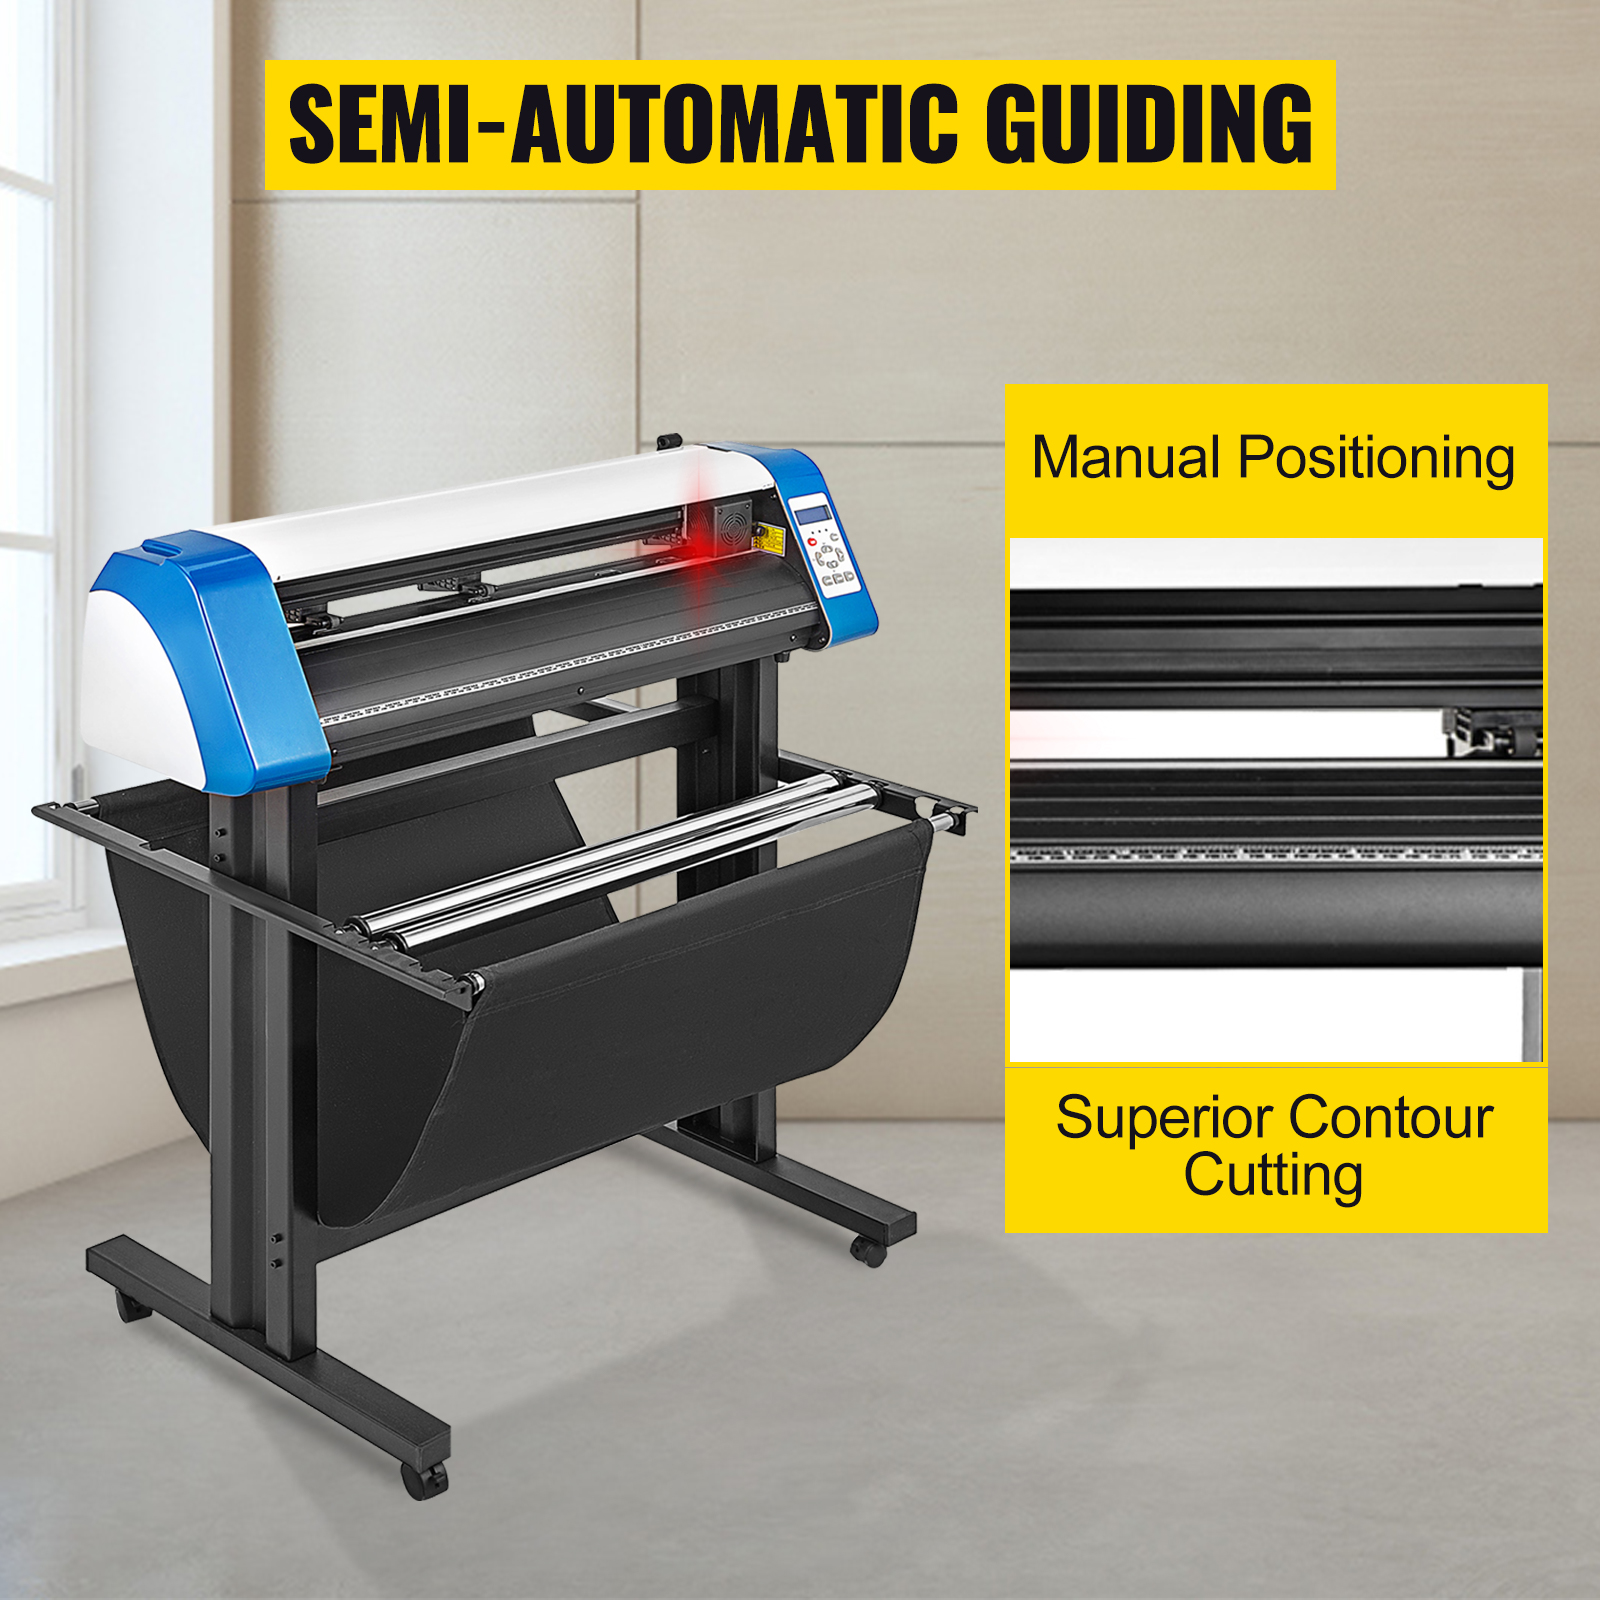 VEVOR 53 inch Vinyl Cutter,1350mm Semi-Automatic DIY Vinyl Cutting Plotter,Vinyl  Cutter Machine Vinyl Printer Cutter Machine Manual Positioning Sign Cutting  with Floor Stand Signmaster Software 